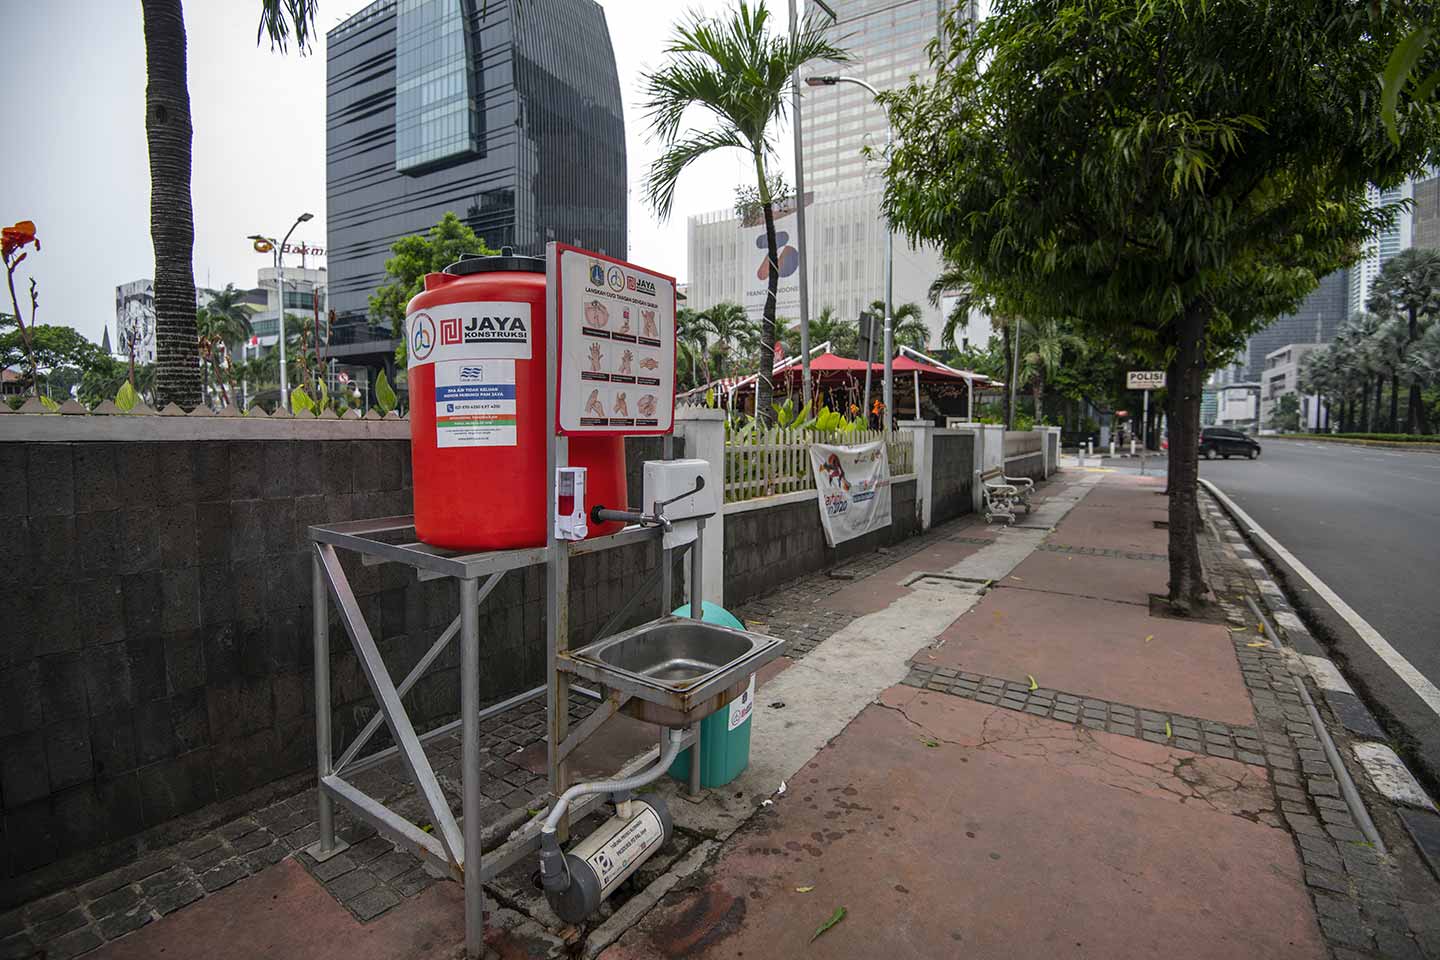 The Jakarta Provincial Government provided a washing area for people on the sidewalk during the Covid-19 outbreak in Central Jakarta, Indonesia in April, 2020.  Credit: UNICEF/Arimacs Wilander